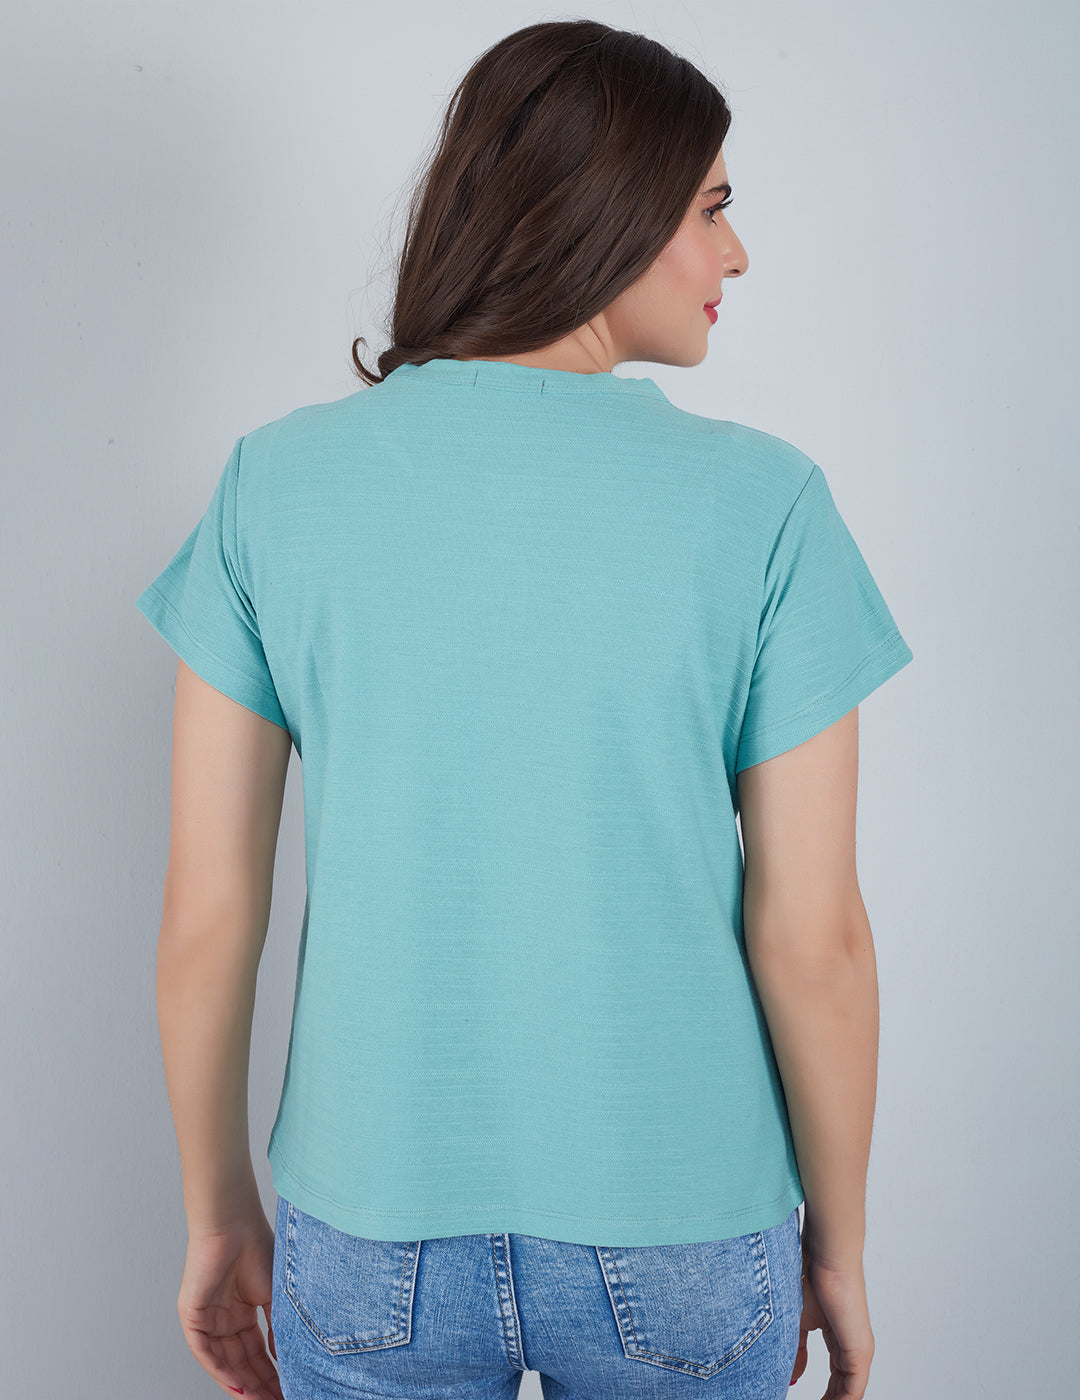 Stylish Sage Plain Cotton Short T-shirts For Women Online In India